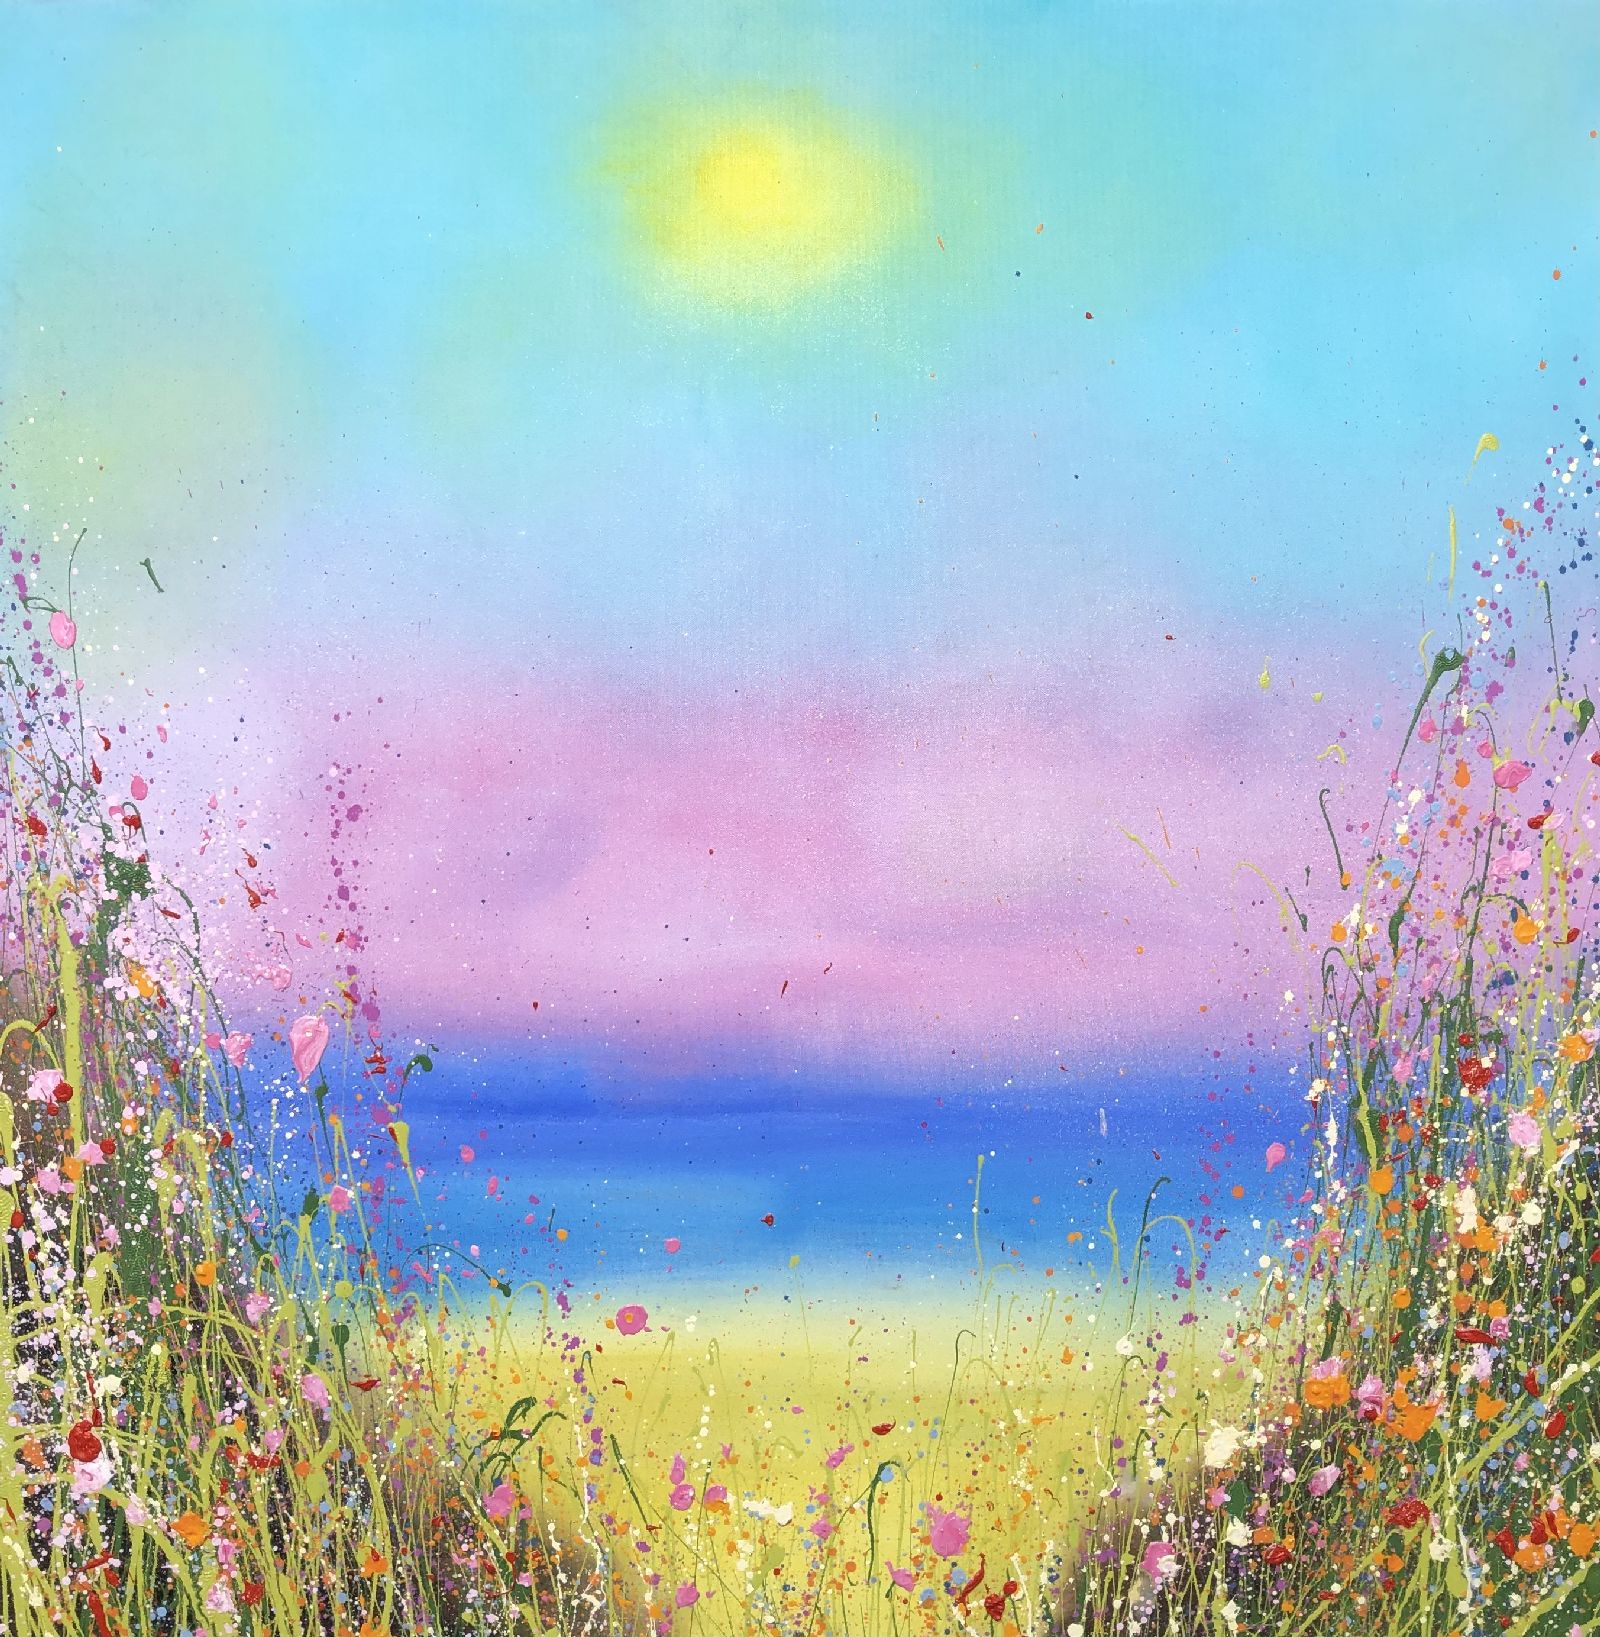 Where The Mermaids Kiss the Sky  by Yvonne Coomber